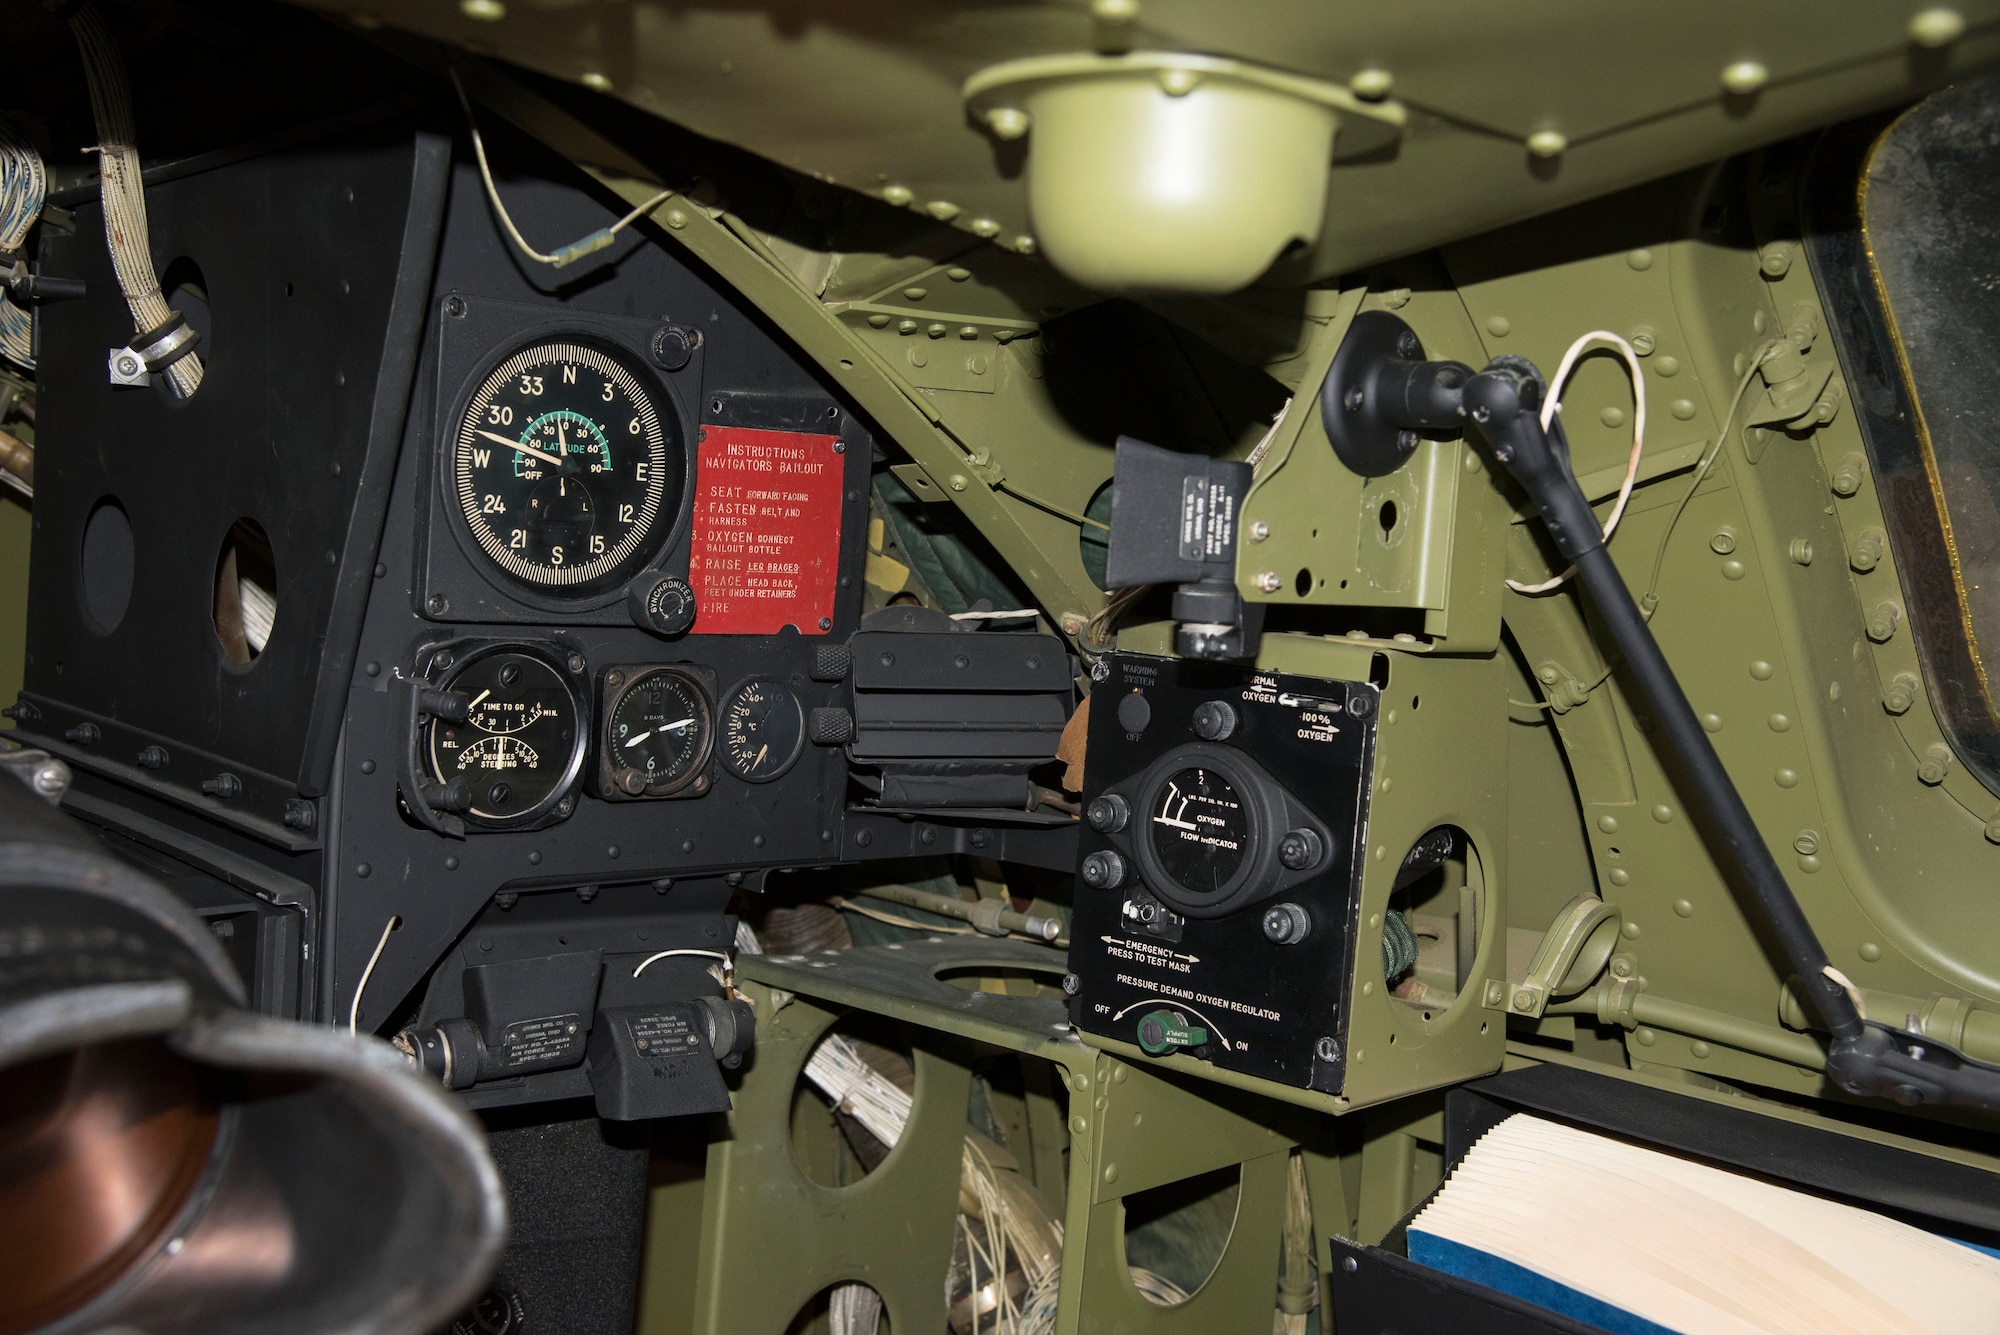 DAYTON, Ohio -- Boeing RB-47H Stratojet navigator controls at the National Museum of the United States Air Force. (U.S. Air Force photo by Ken LaRock)